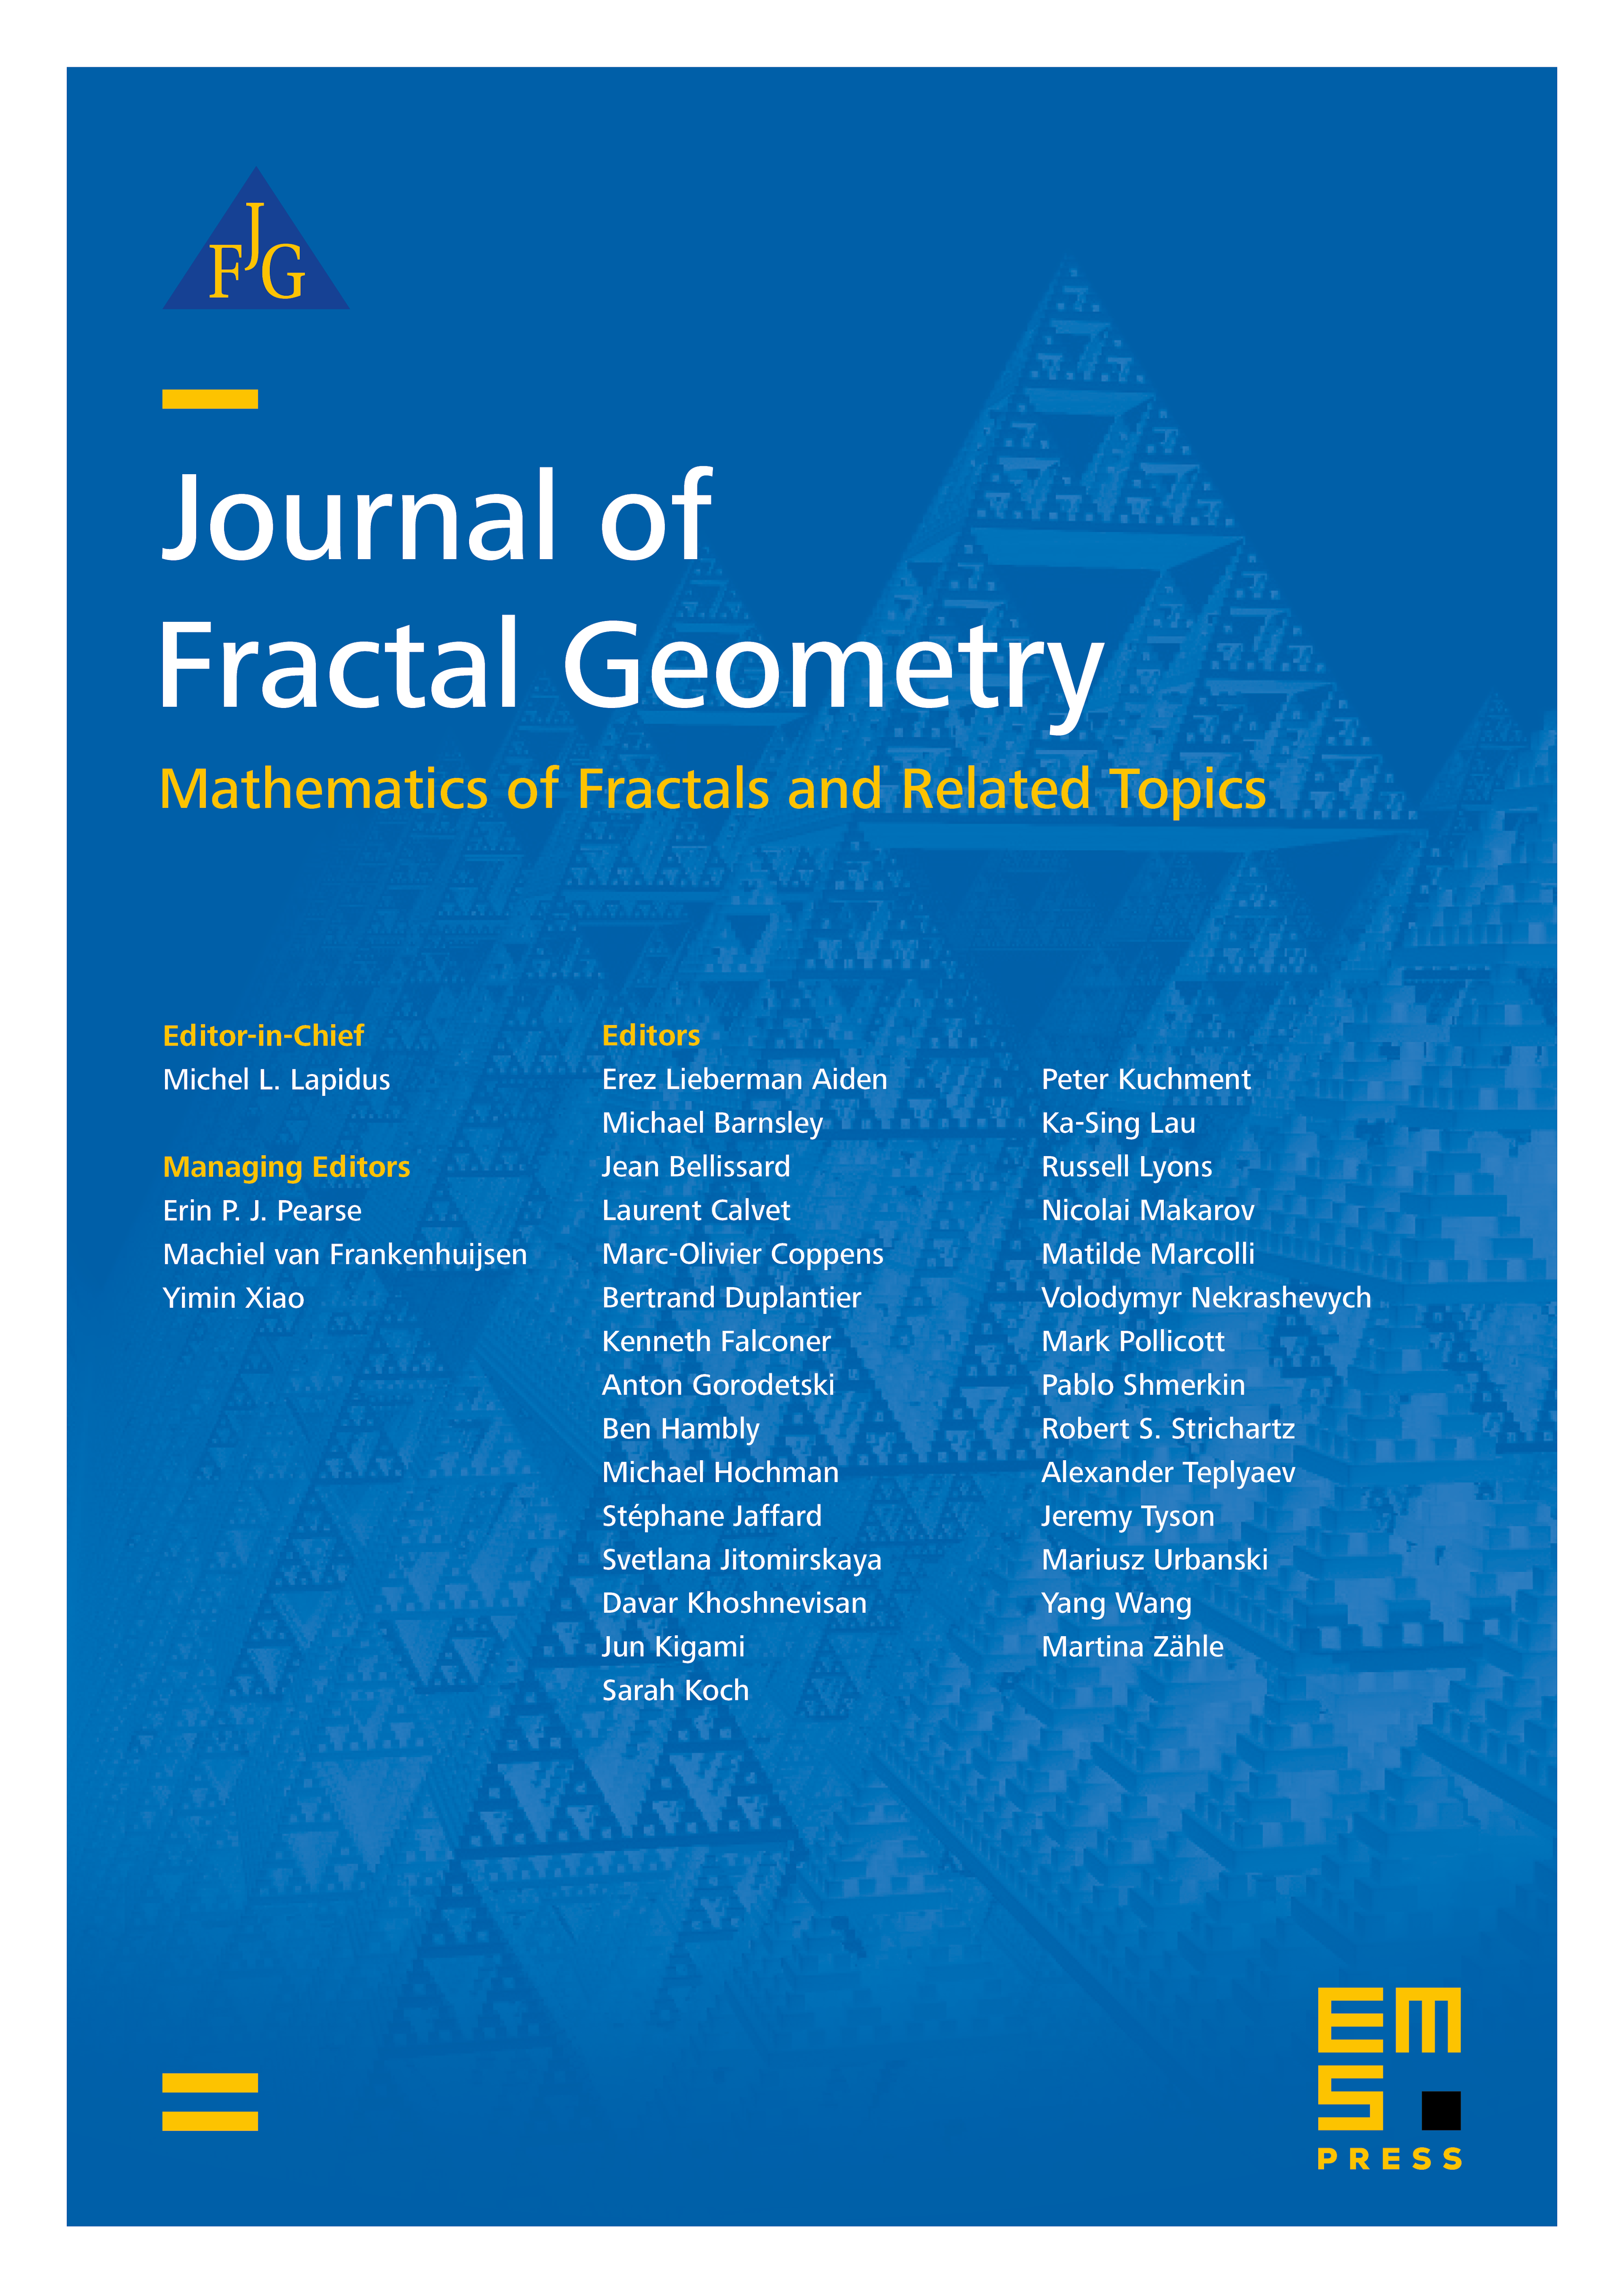 Fractal tube formulas for compact sets and relative fractal drums: oscillations, complex dimensions and fractality cover